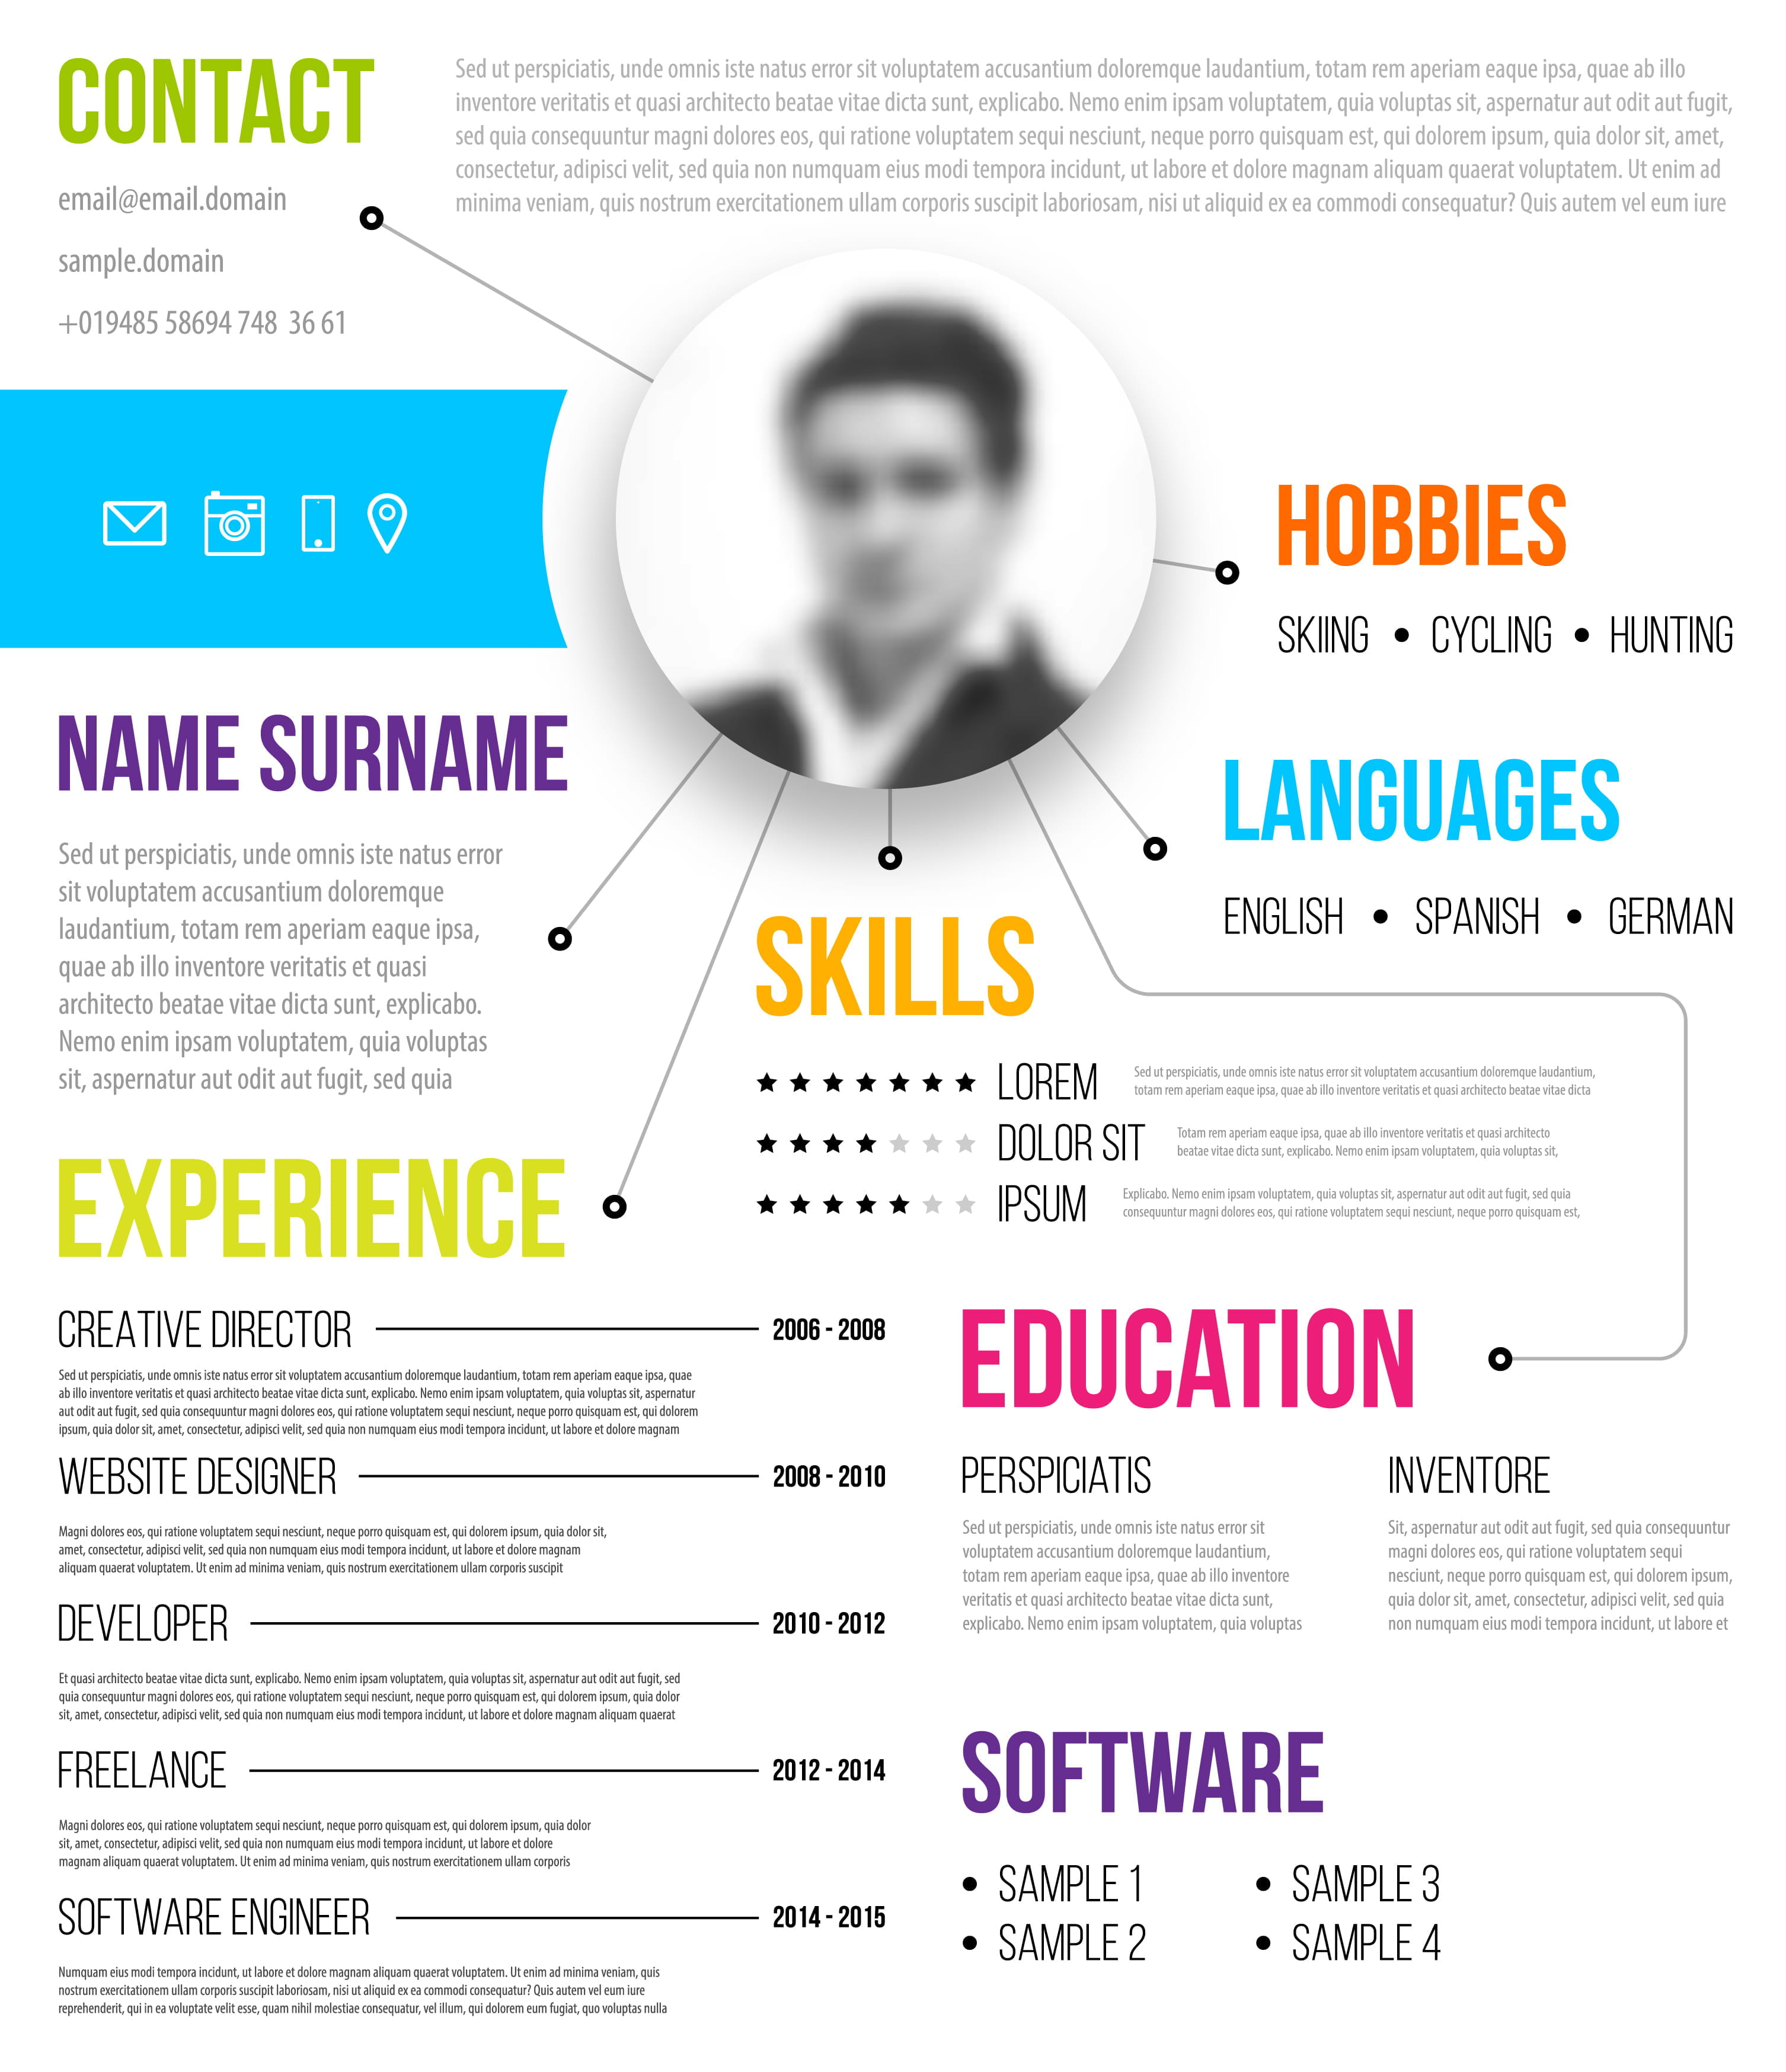 How to make a resume to get a job